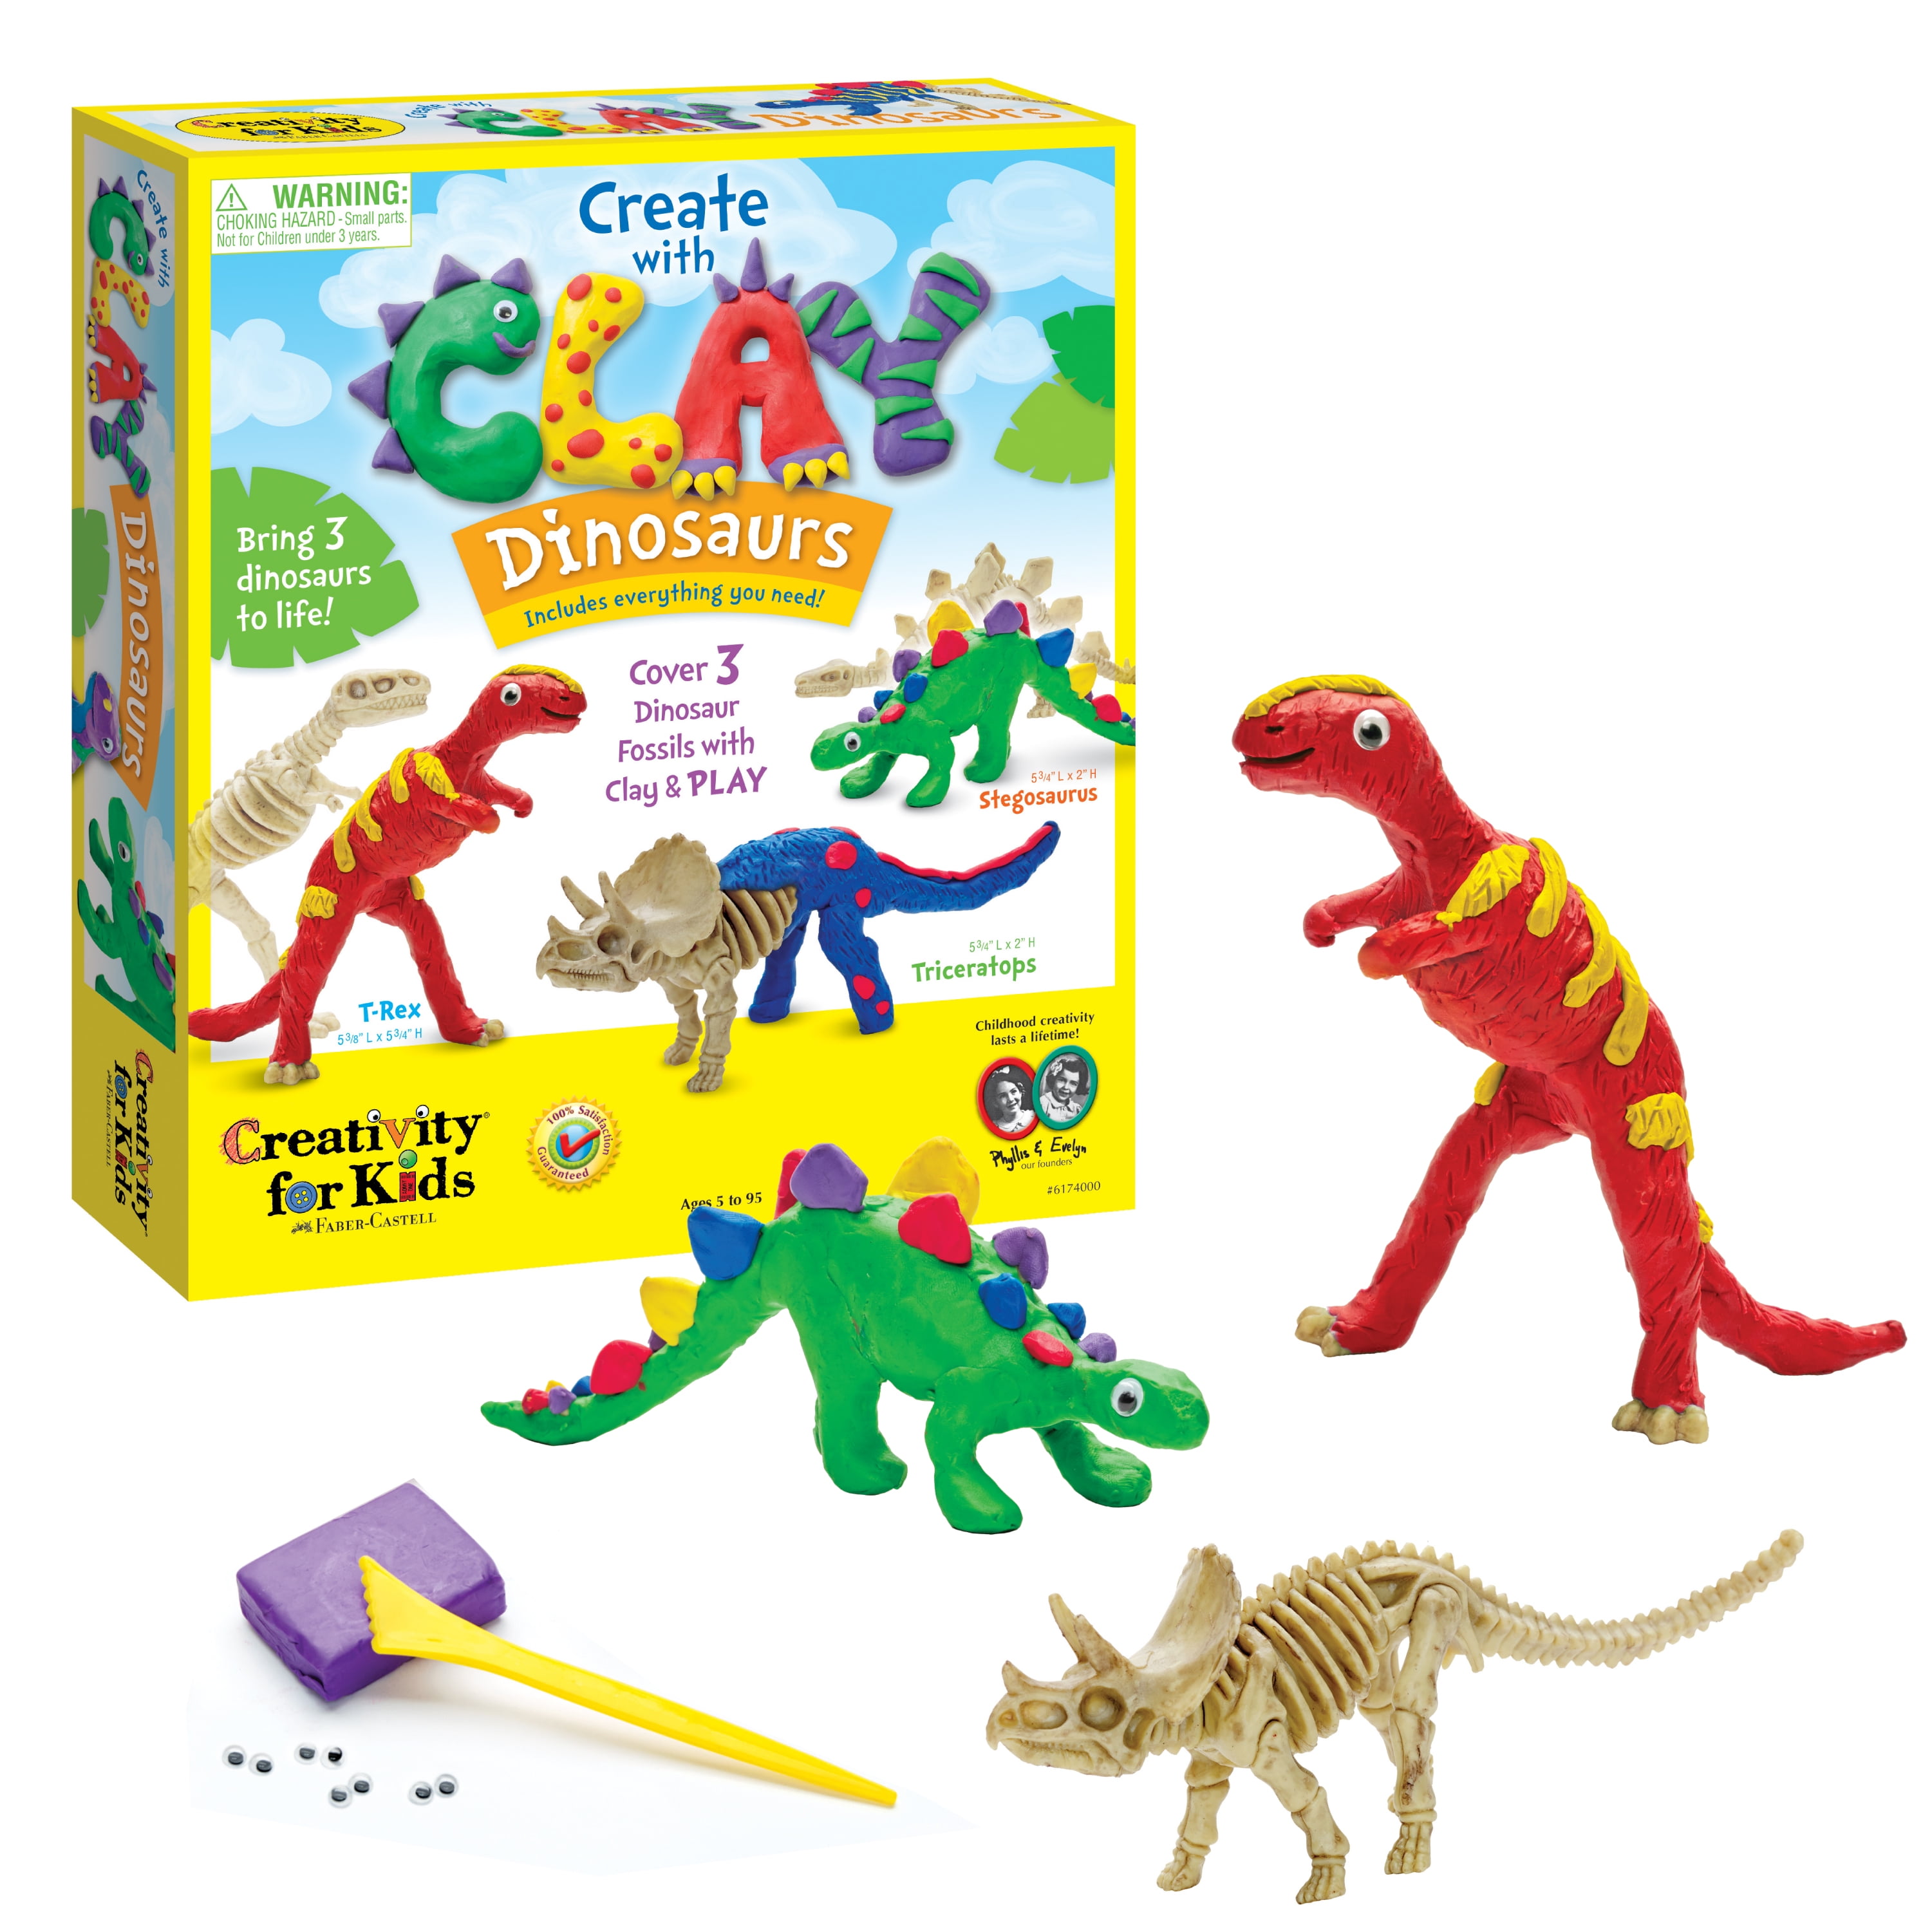 T-Rex Plush Dinosaur Coloring Book Gift Set Arts and Crafts Soft DIY Washable Dino Doodle Doll Stuffed Animal Toy Painting Craft Kit Toys Play Dinosaur Gifts for Kids Boys and Girls Ages 3-5 5-7 